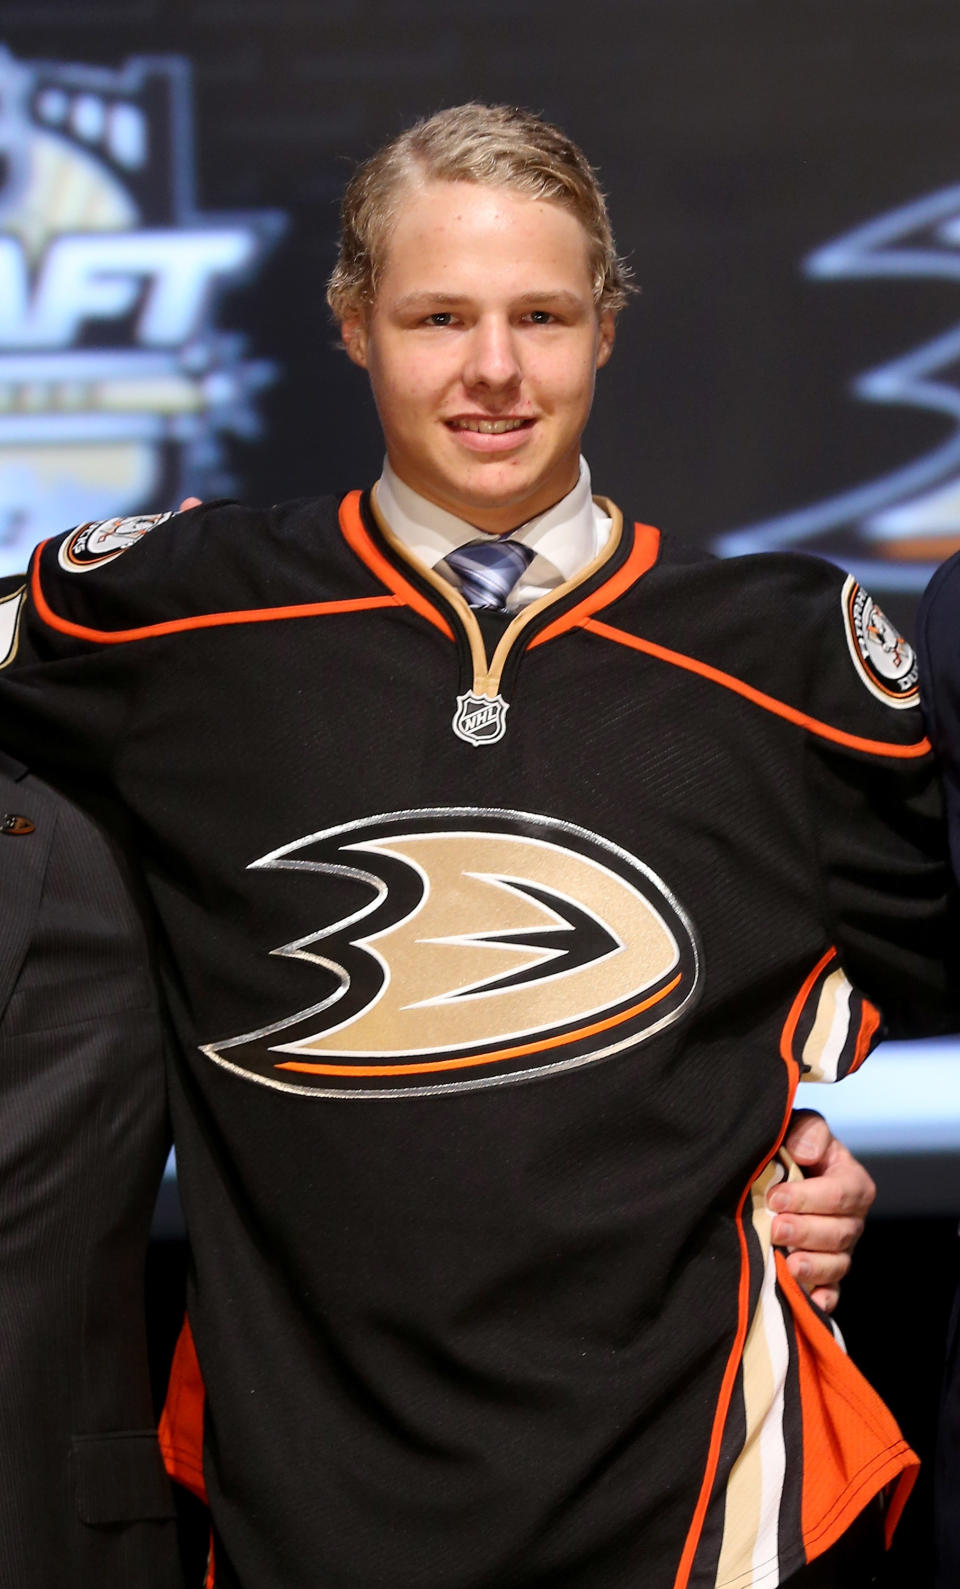 PITTSBURGH, PA - JUNE 22: Hampus Lindholm, sixth overall pick by the Anaheim Ducks, poses on stage during Round One of the 2012 NHL Entry Draft at Consol Energy Center on June 22, 2012 in Pittsburgh, Pennsylvania. (Photo by Bruce Bennett/Getty Images)